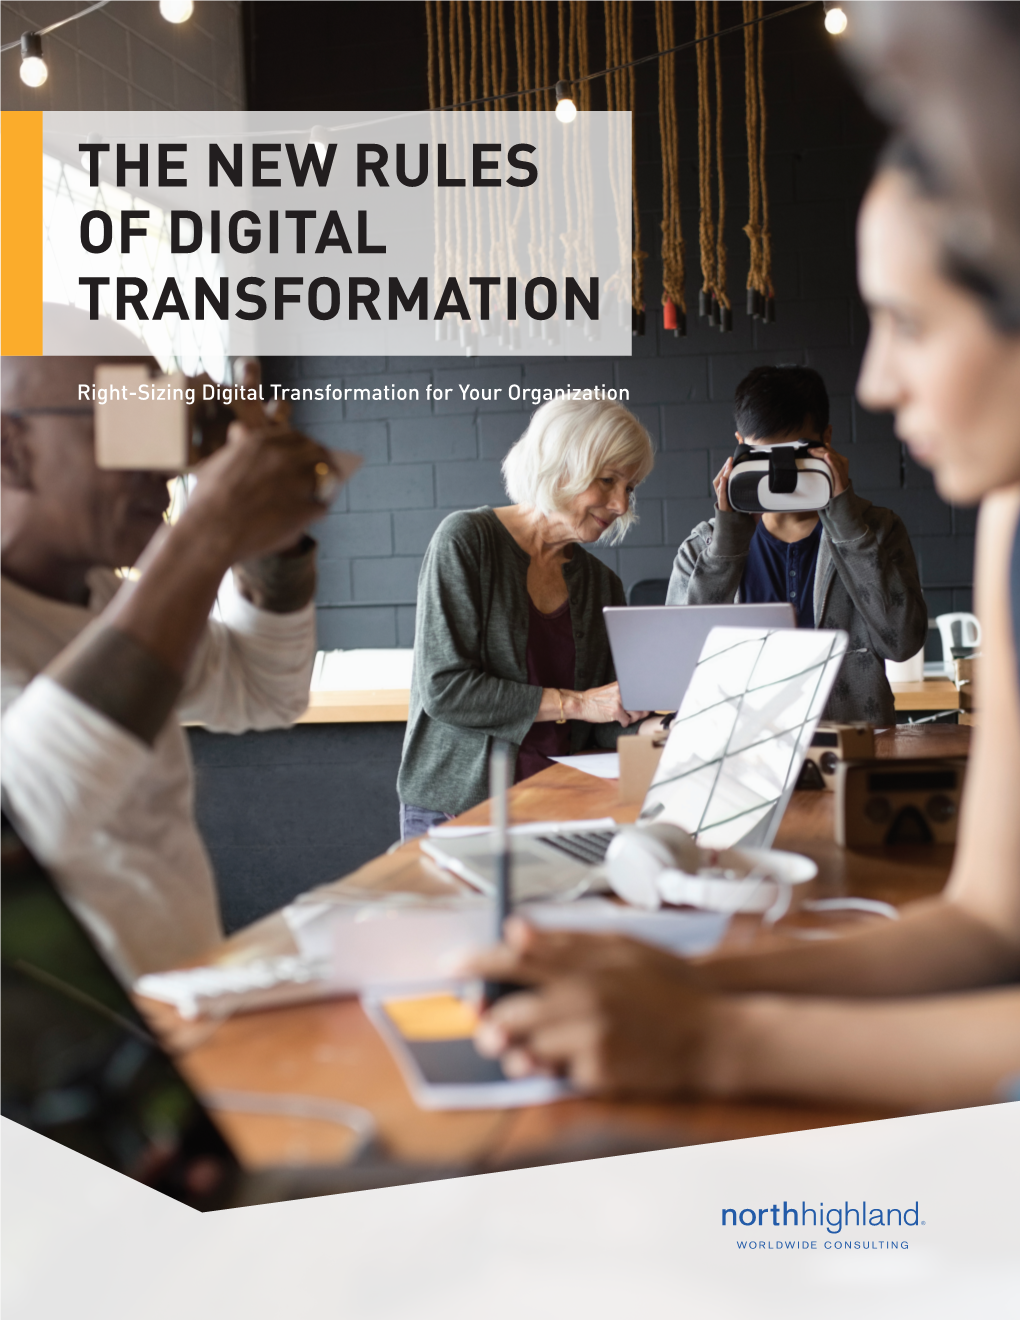 The New Rules of Digital Transformation